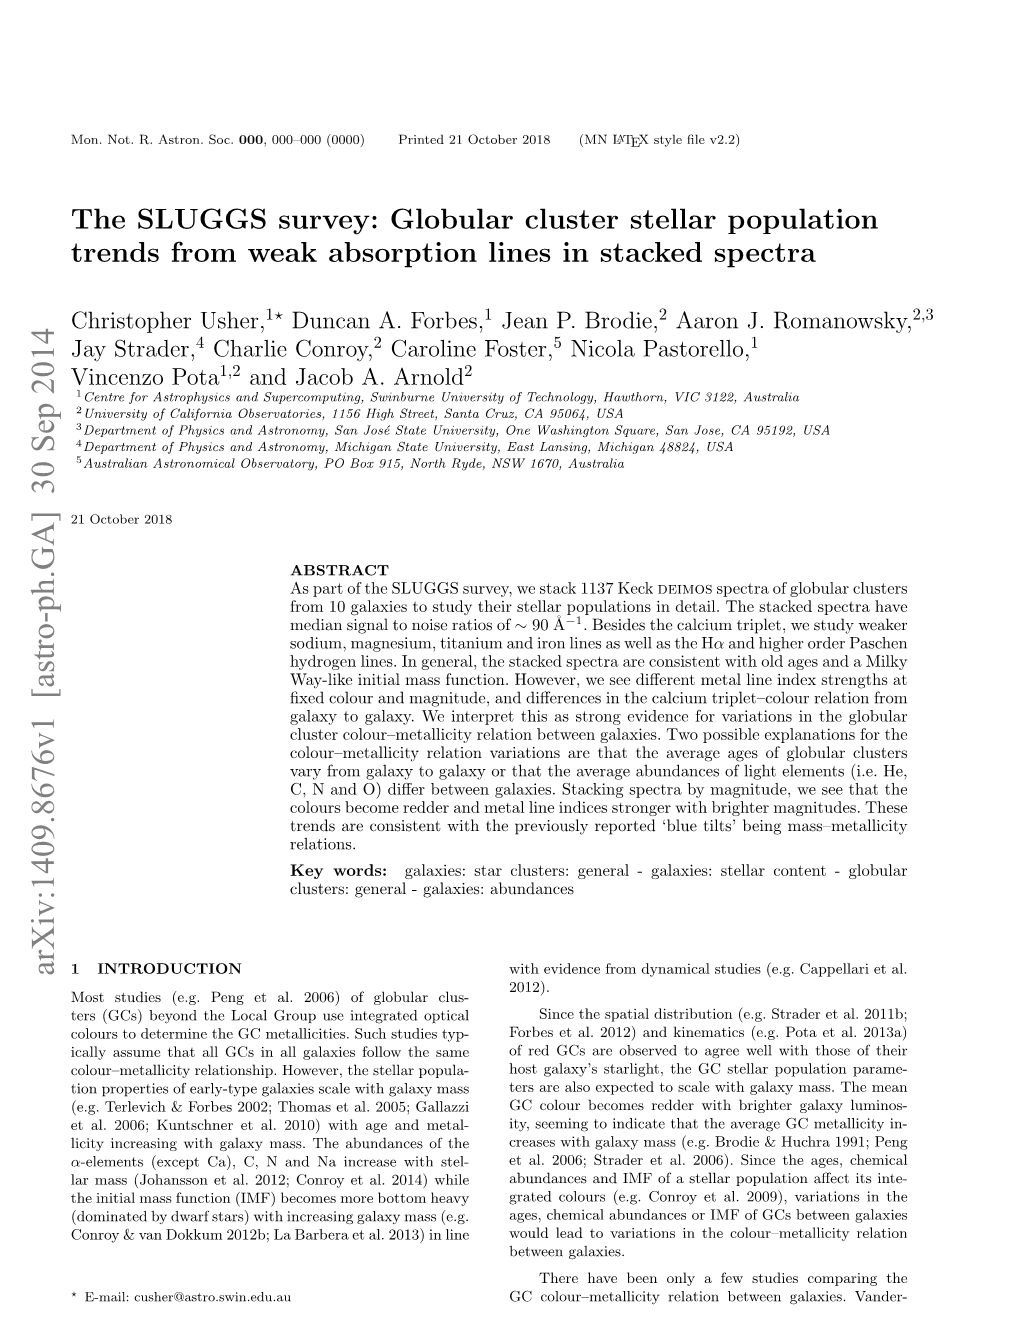 The SLUGGS Survey: Globular Cluster Stellar Population Trends from Weak Absorption Lines in Stacked Spectra